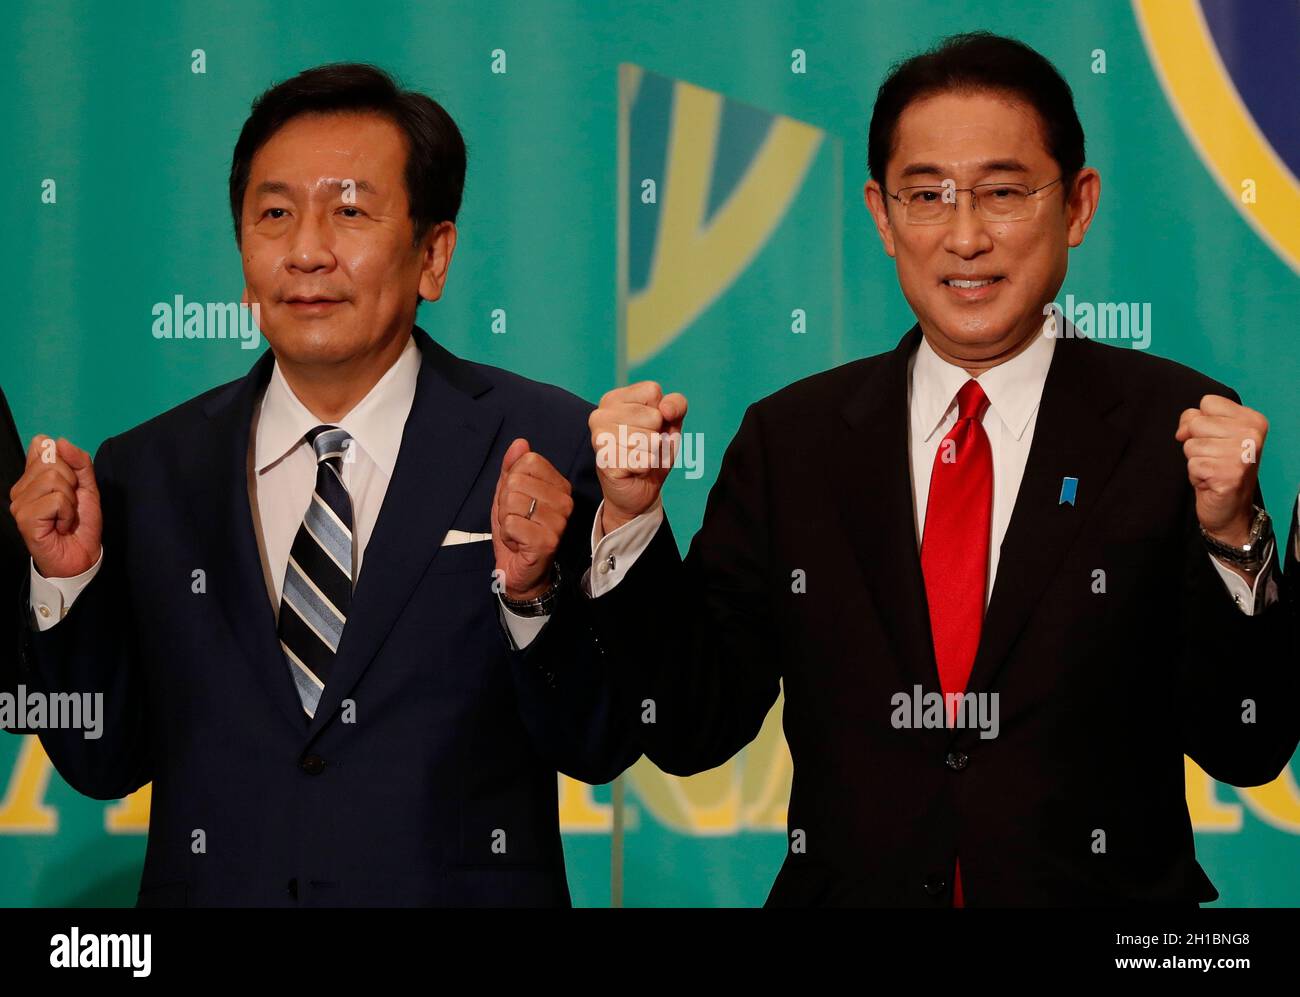 Tokyo, Japan. 18th Oct, 2021. Leaders of Japan's main political parties, the Constitutional Democratic Party of Japan leader Yukio Edano (L), Prime Minister and ruling Liberal Democratic Party President Fumio Kishida (R), and other leaders attend a debate session ahead of October 31, 2021 lower house election, at the Japan National Press Club in Tokyo, Japan October 18, 2021. (Photo by Issei Kato/SOPA Images/Sipa USA) Credit: Sipa USA/Alamy Live News Stock Photo